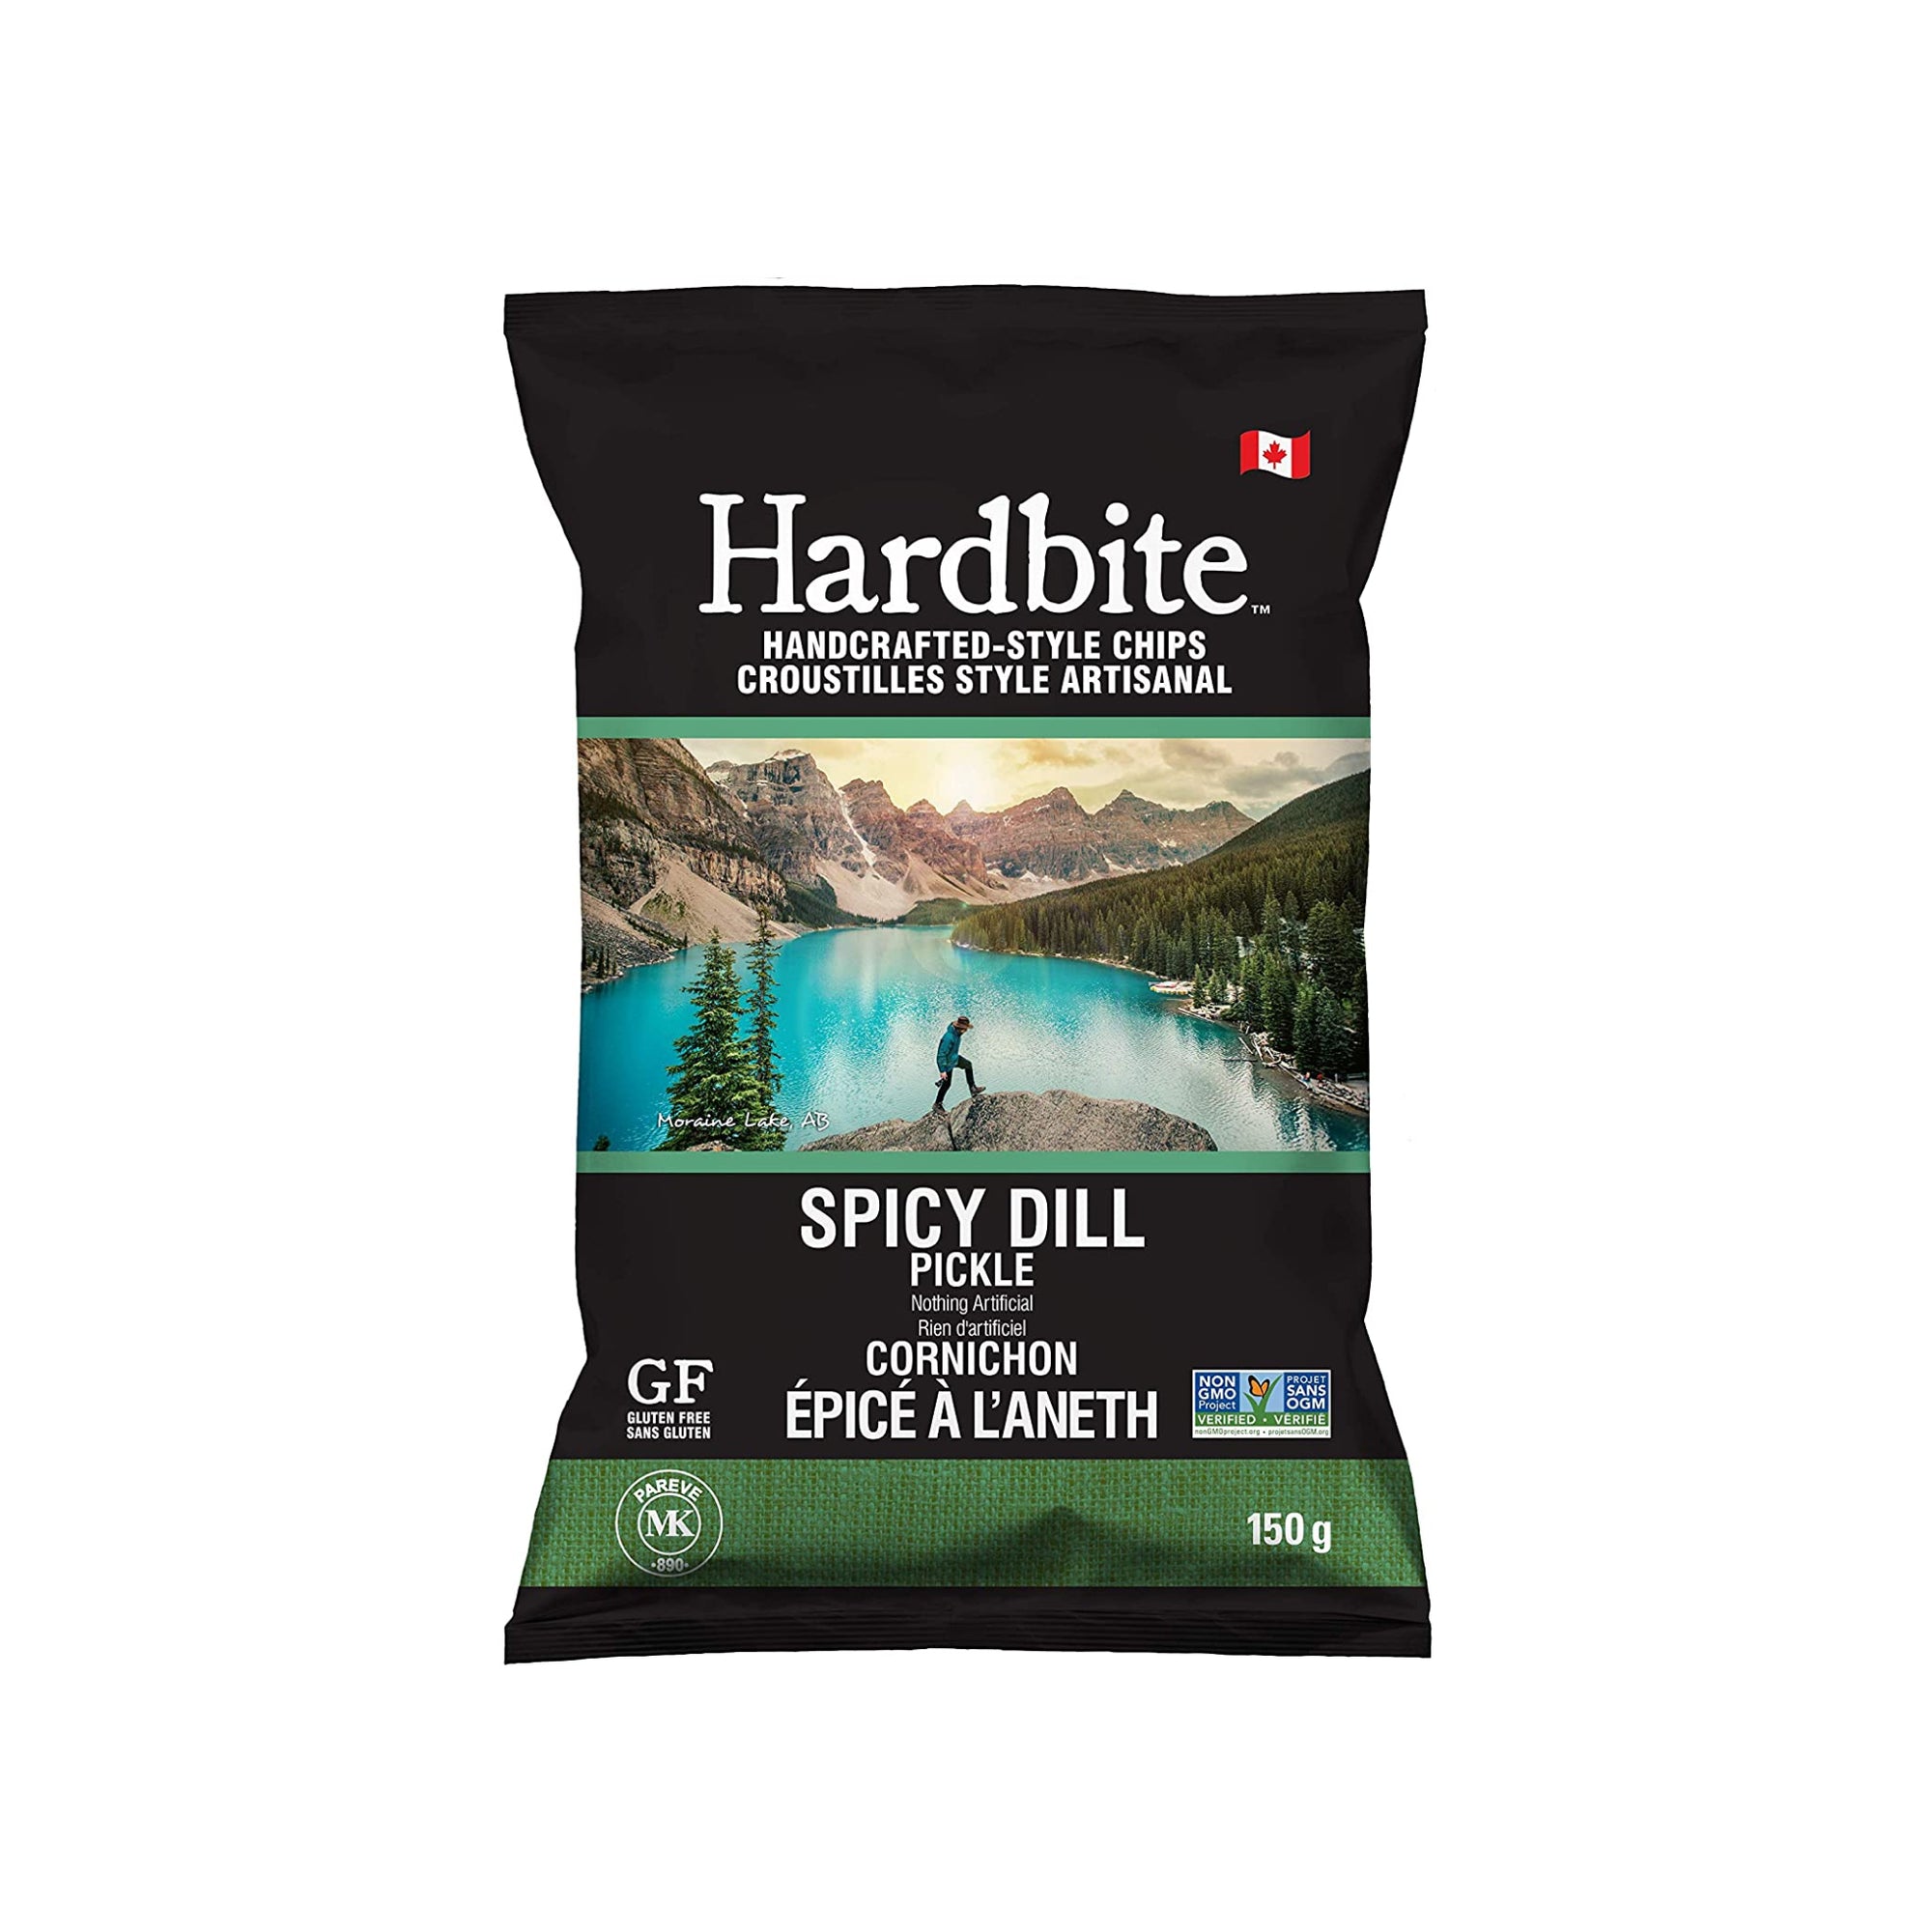 Hardbite Spicy Dill Pickle Potato Chips 150g